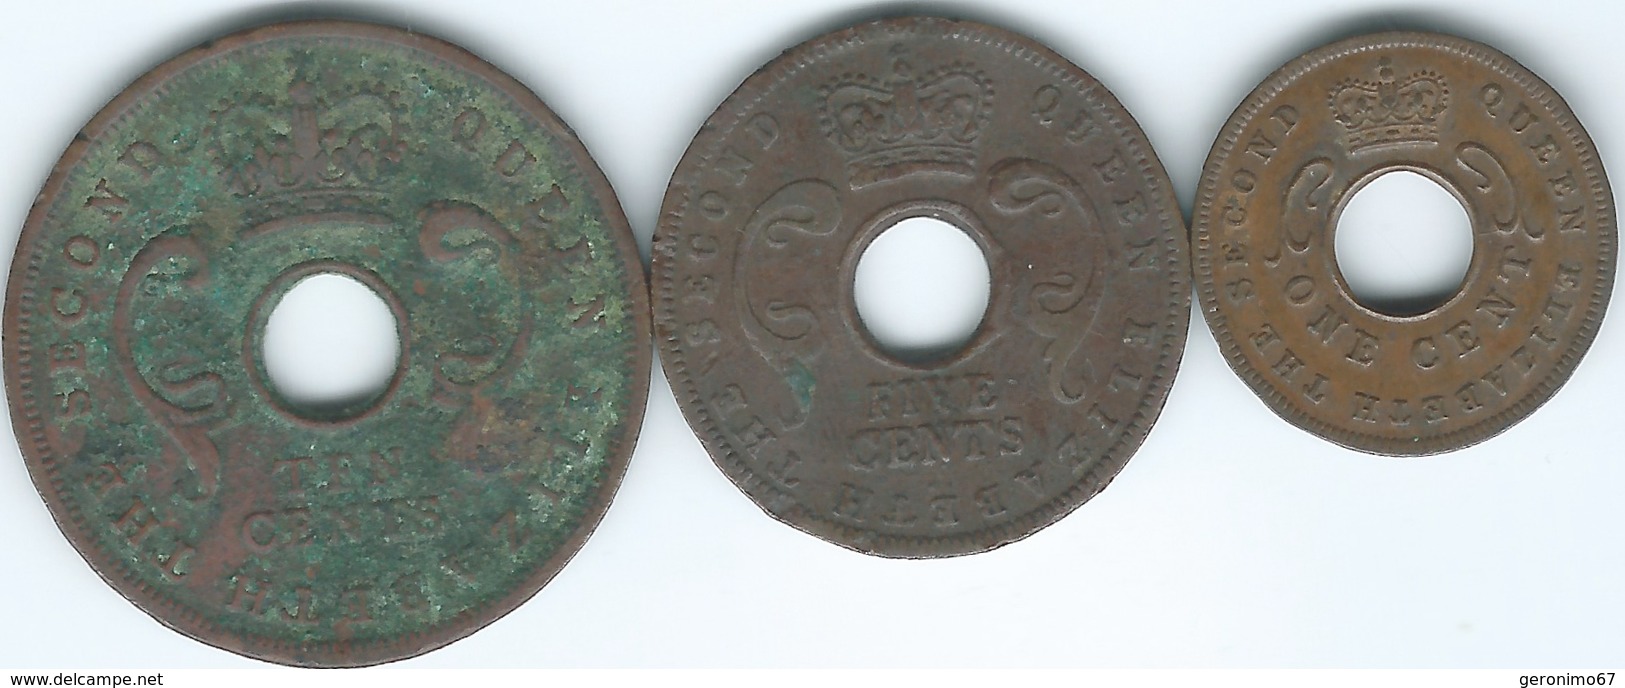 East Africa - Elizabeth II - 1 Cent - 1957 (KM35) 5 Cents - 1955 (KM37) & 10 Cents - 1956 (KM38) - British Colony